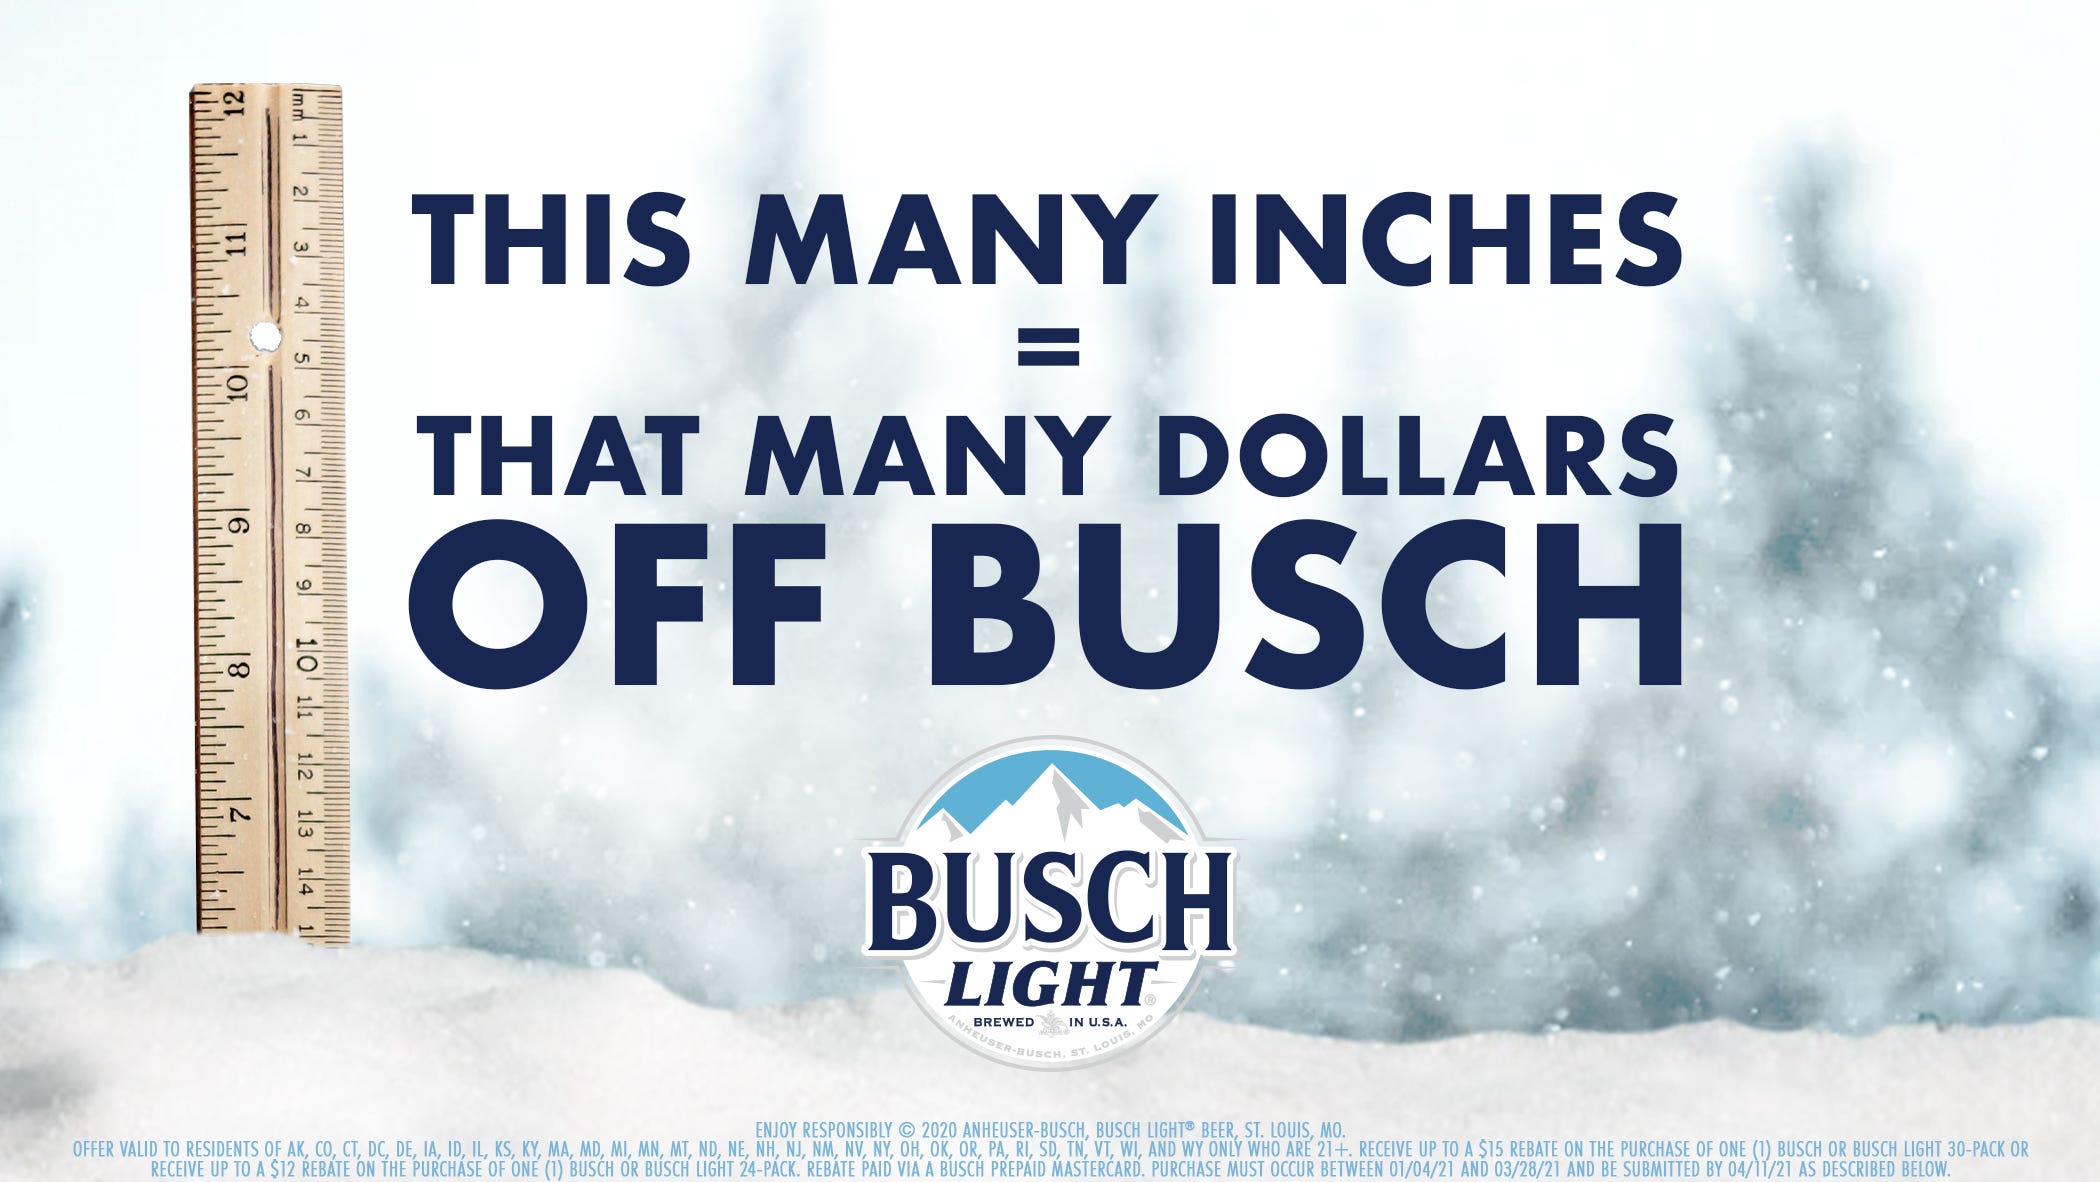 busch-beer-brings-back-1-off-deal-for-each-inch-of-snow-in-green-bay